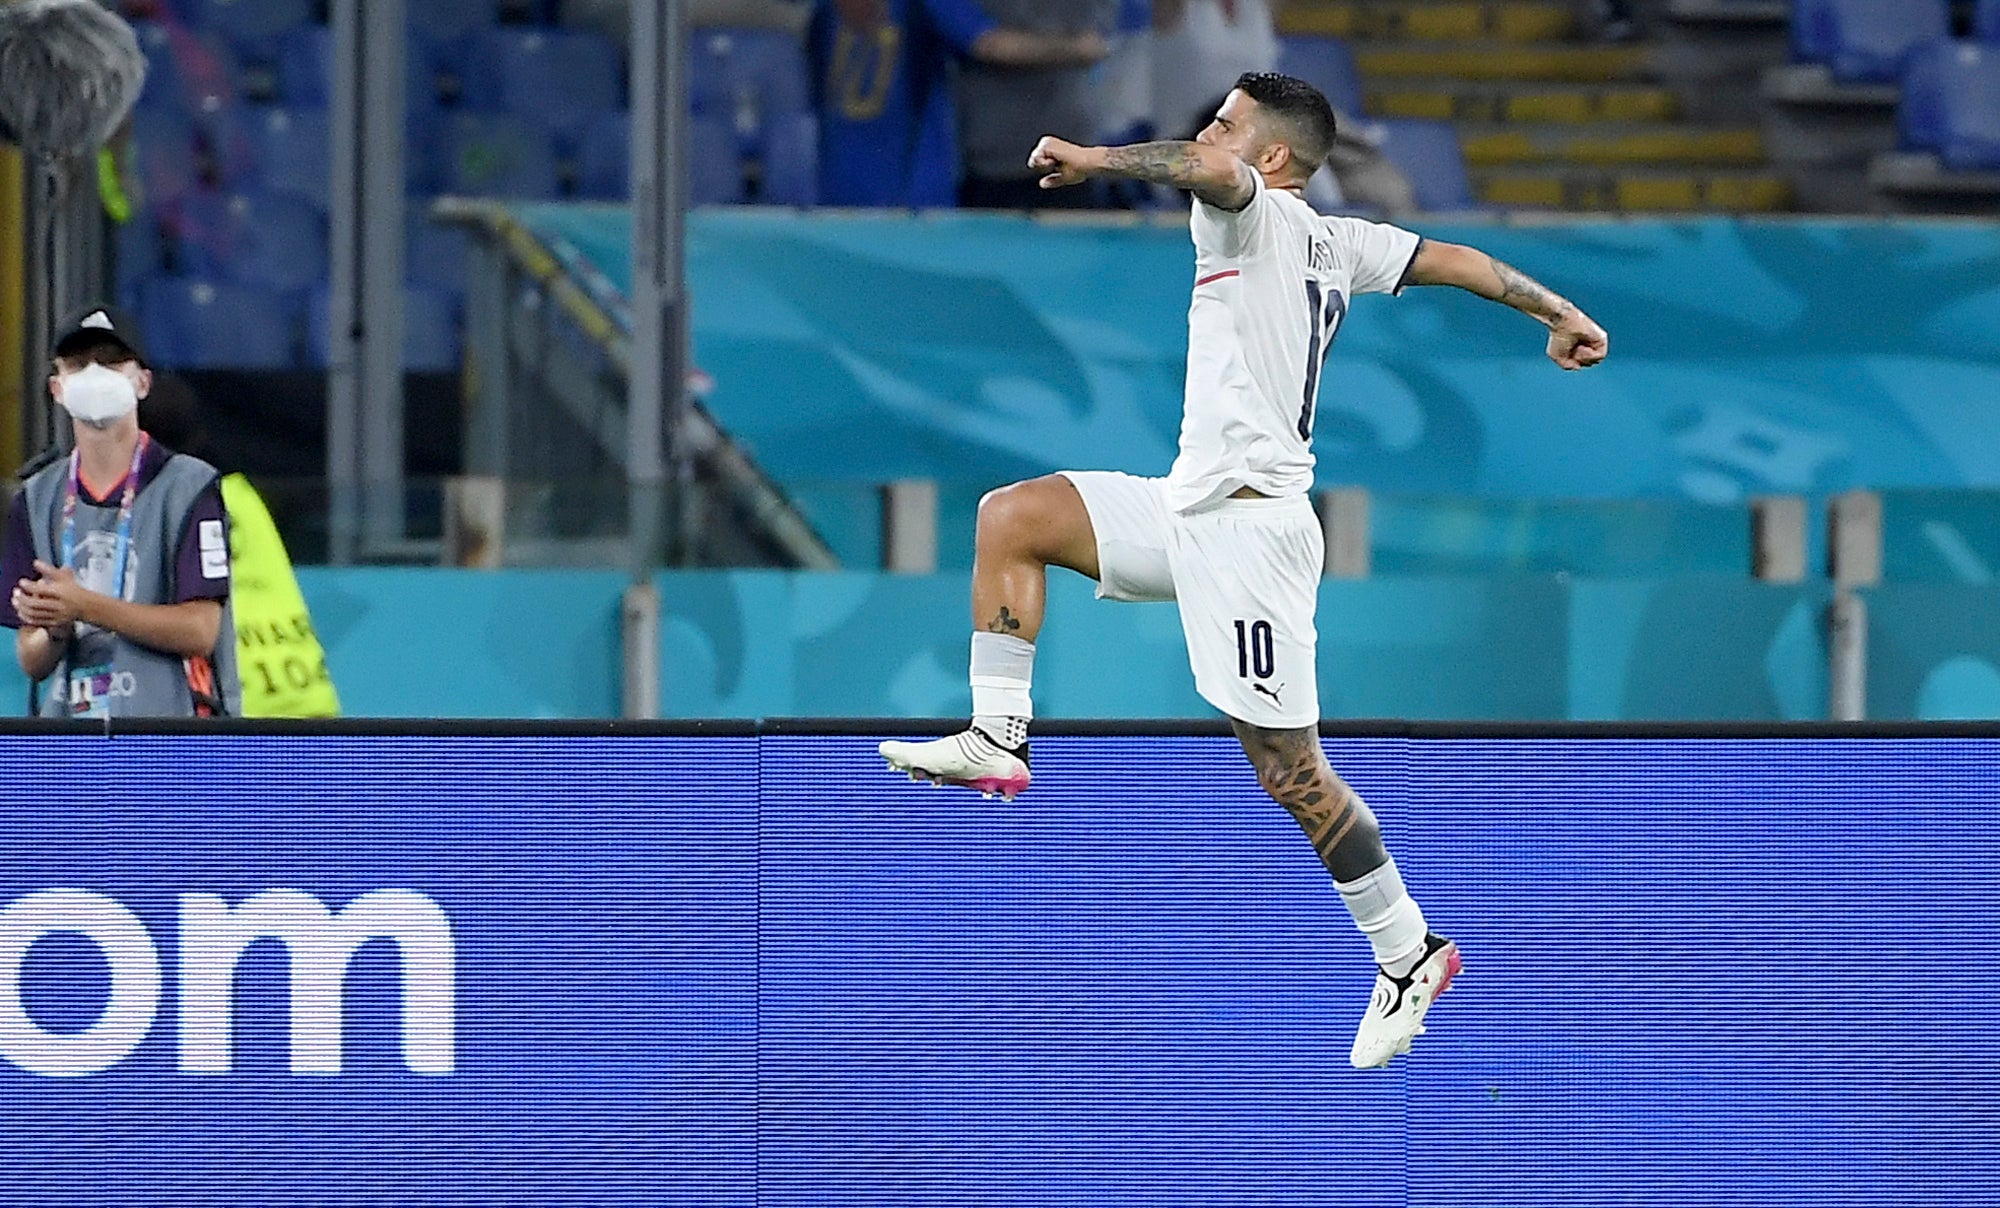 Lorenzo Insigne wrapped up Italy's 3-0 win over Turkey in their opening match